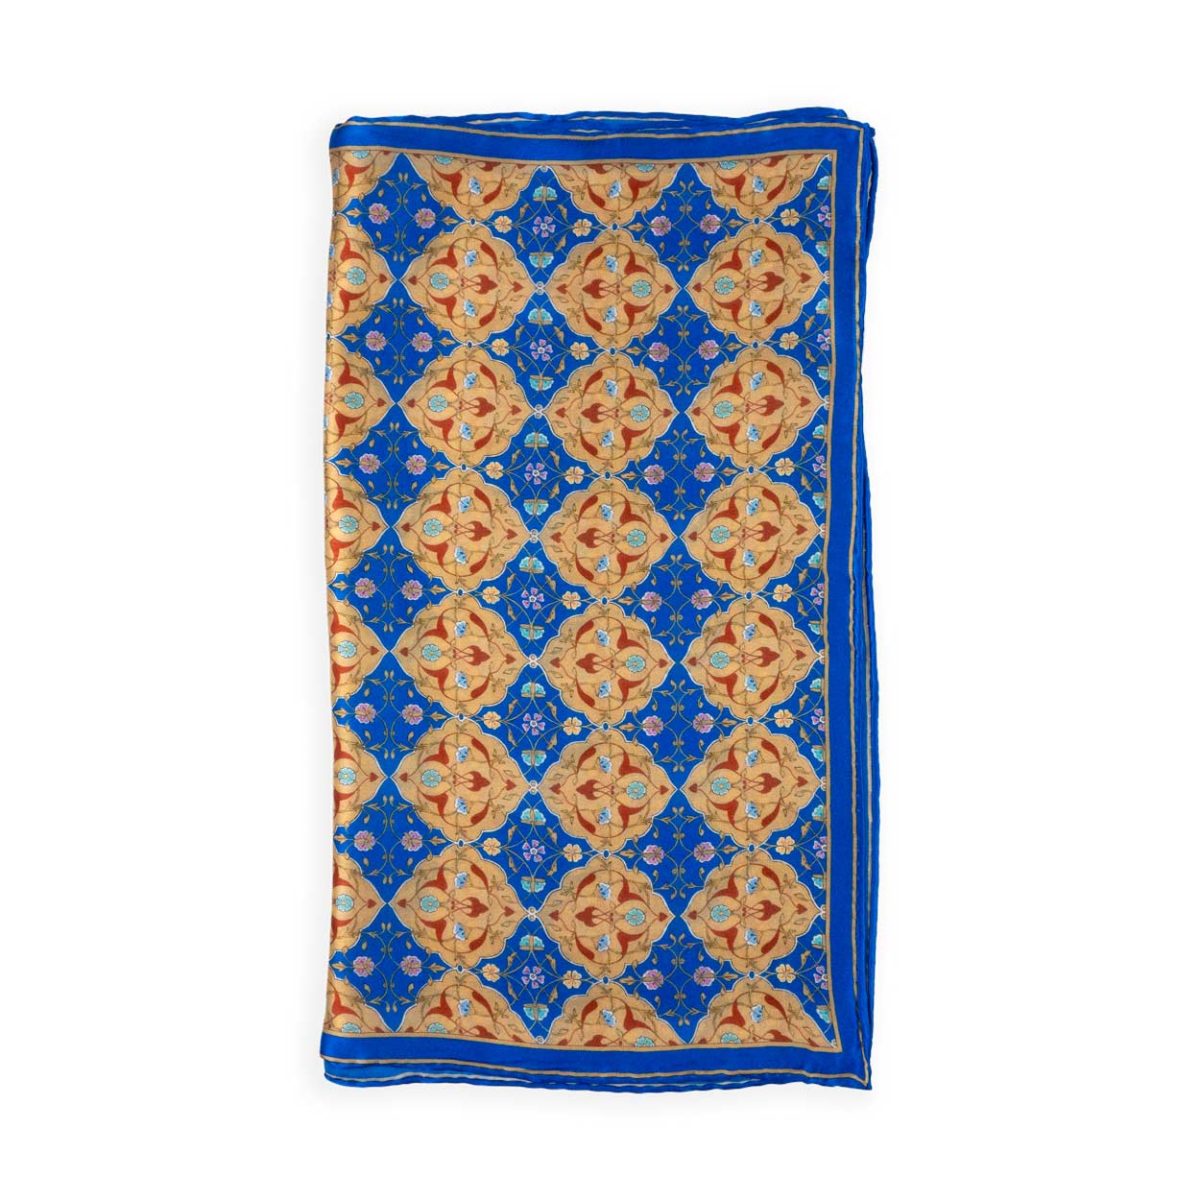 Brown and blue silk scarf with turkish art print